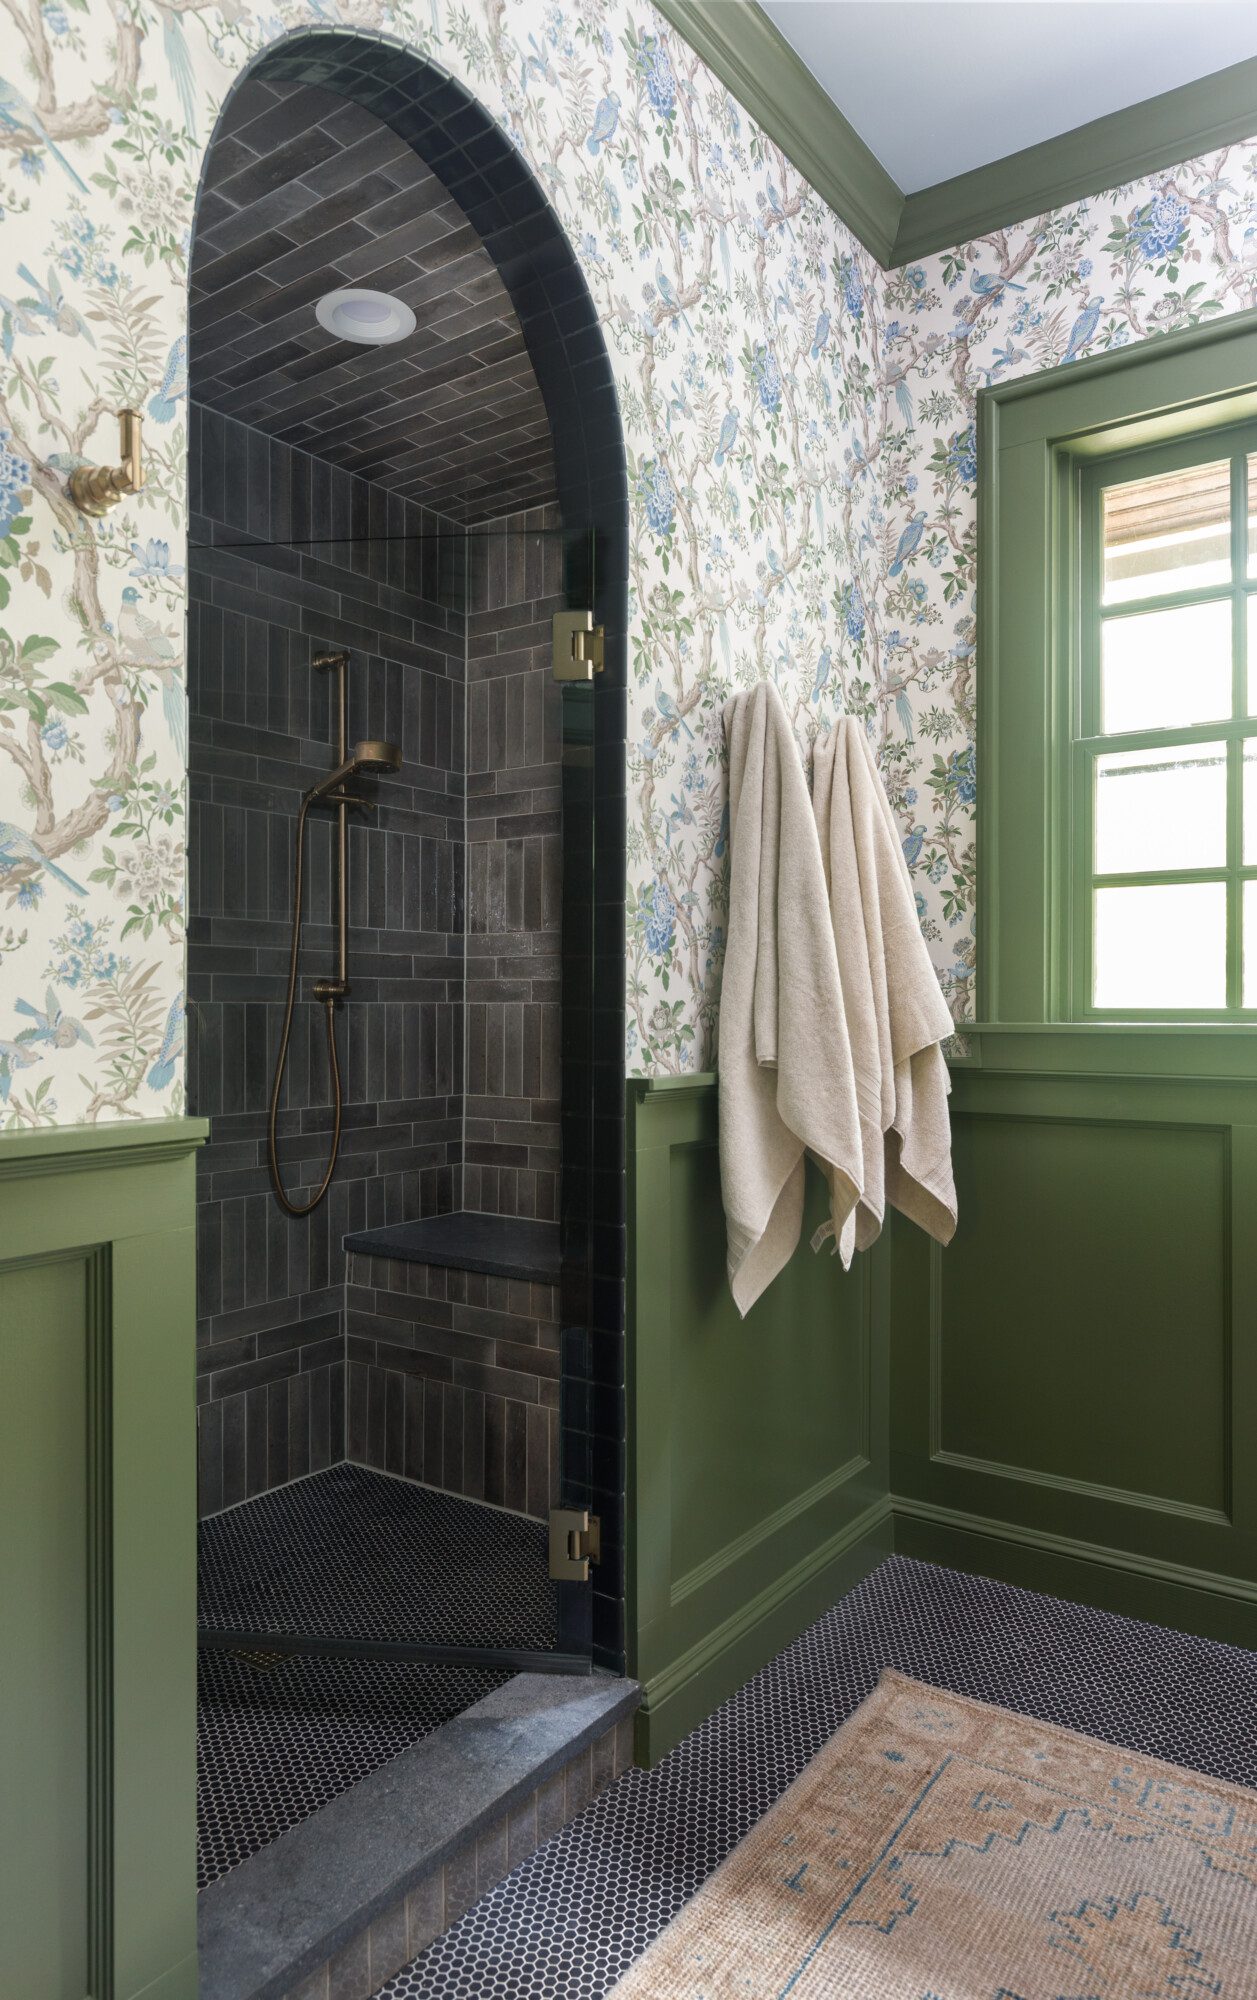 Bathroom with green cabinets, flower wallpaper, and checkered floor